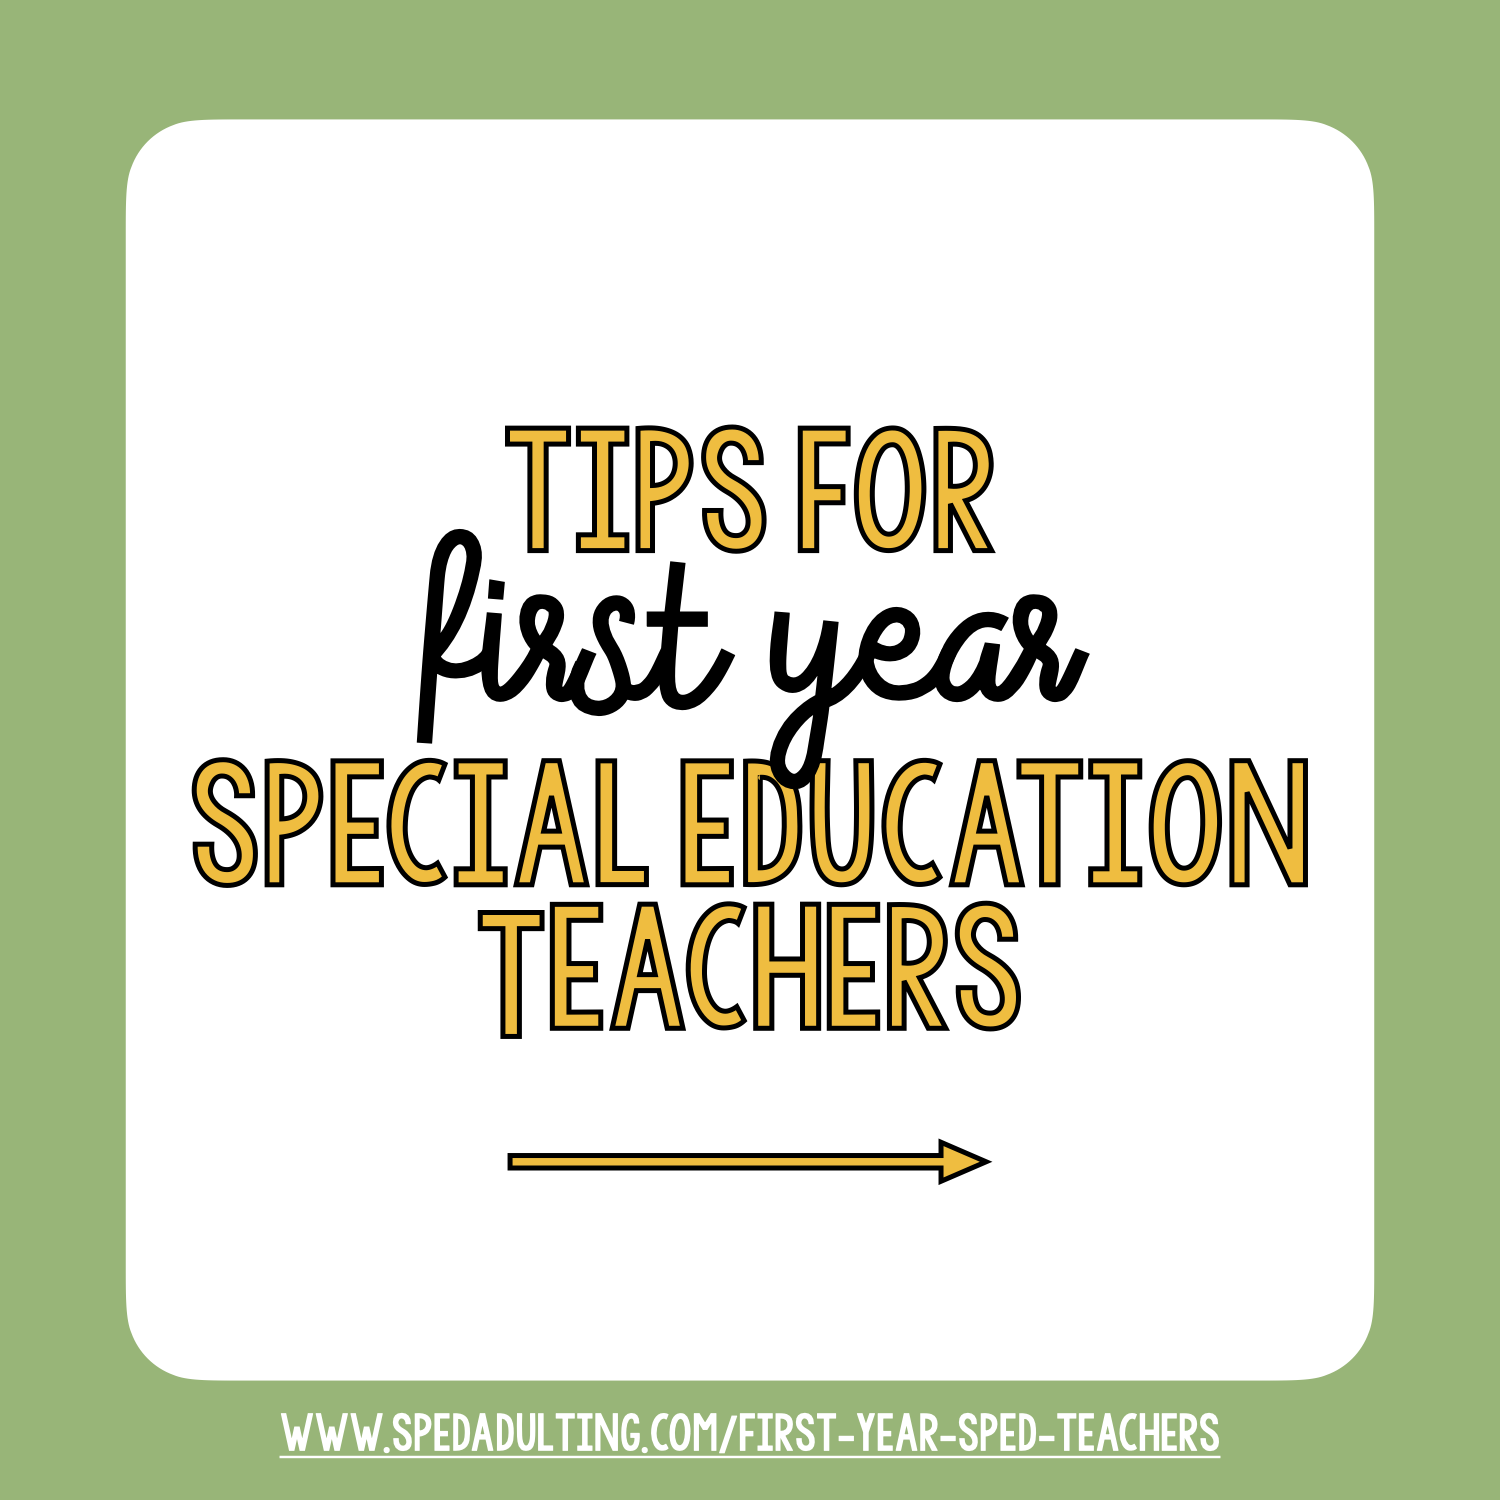 Tips for first year special education teachers